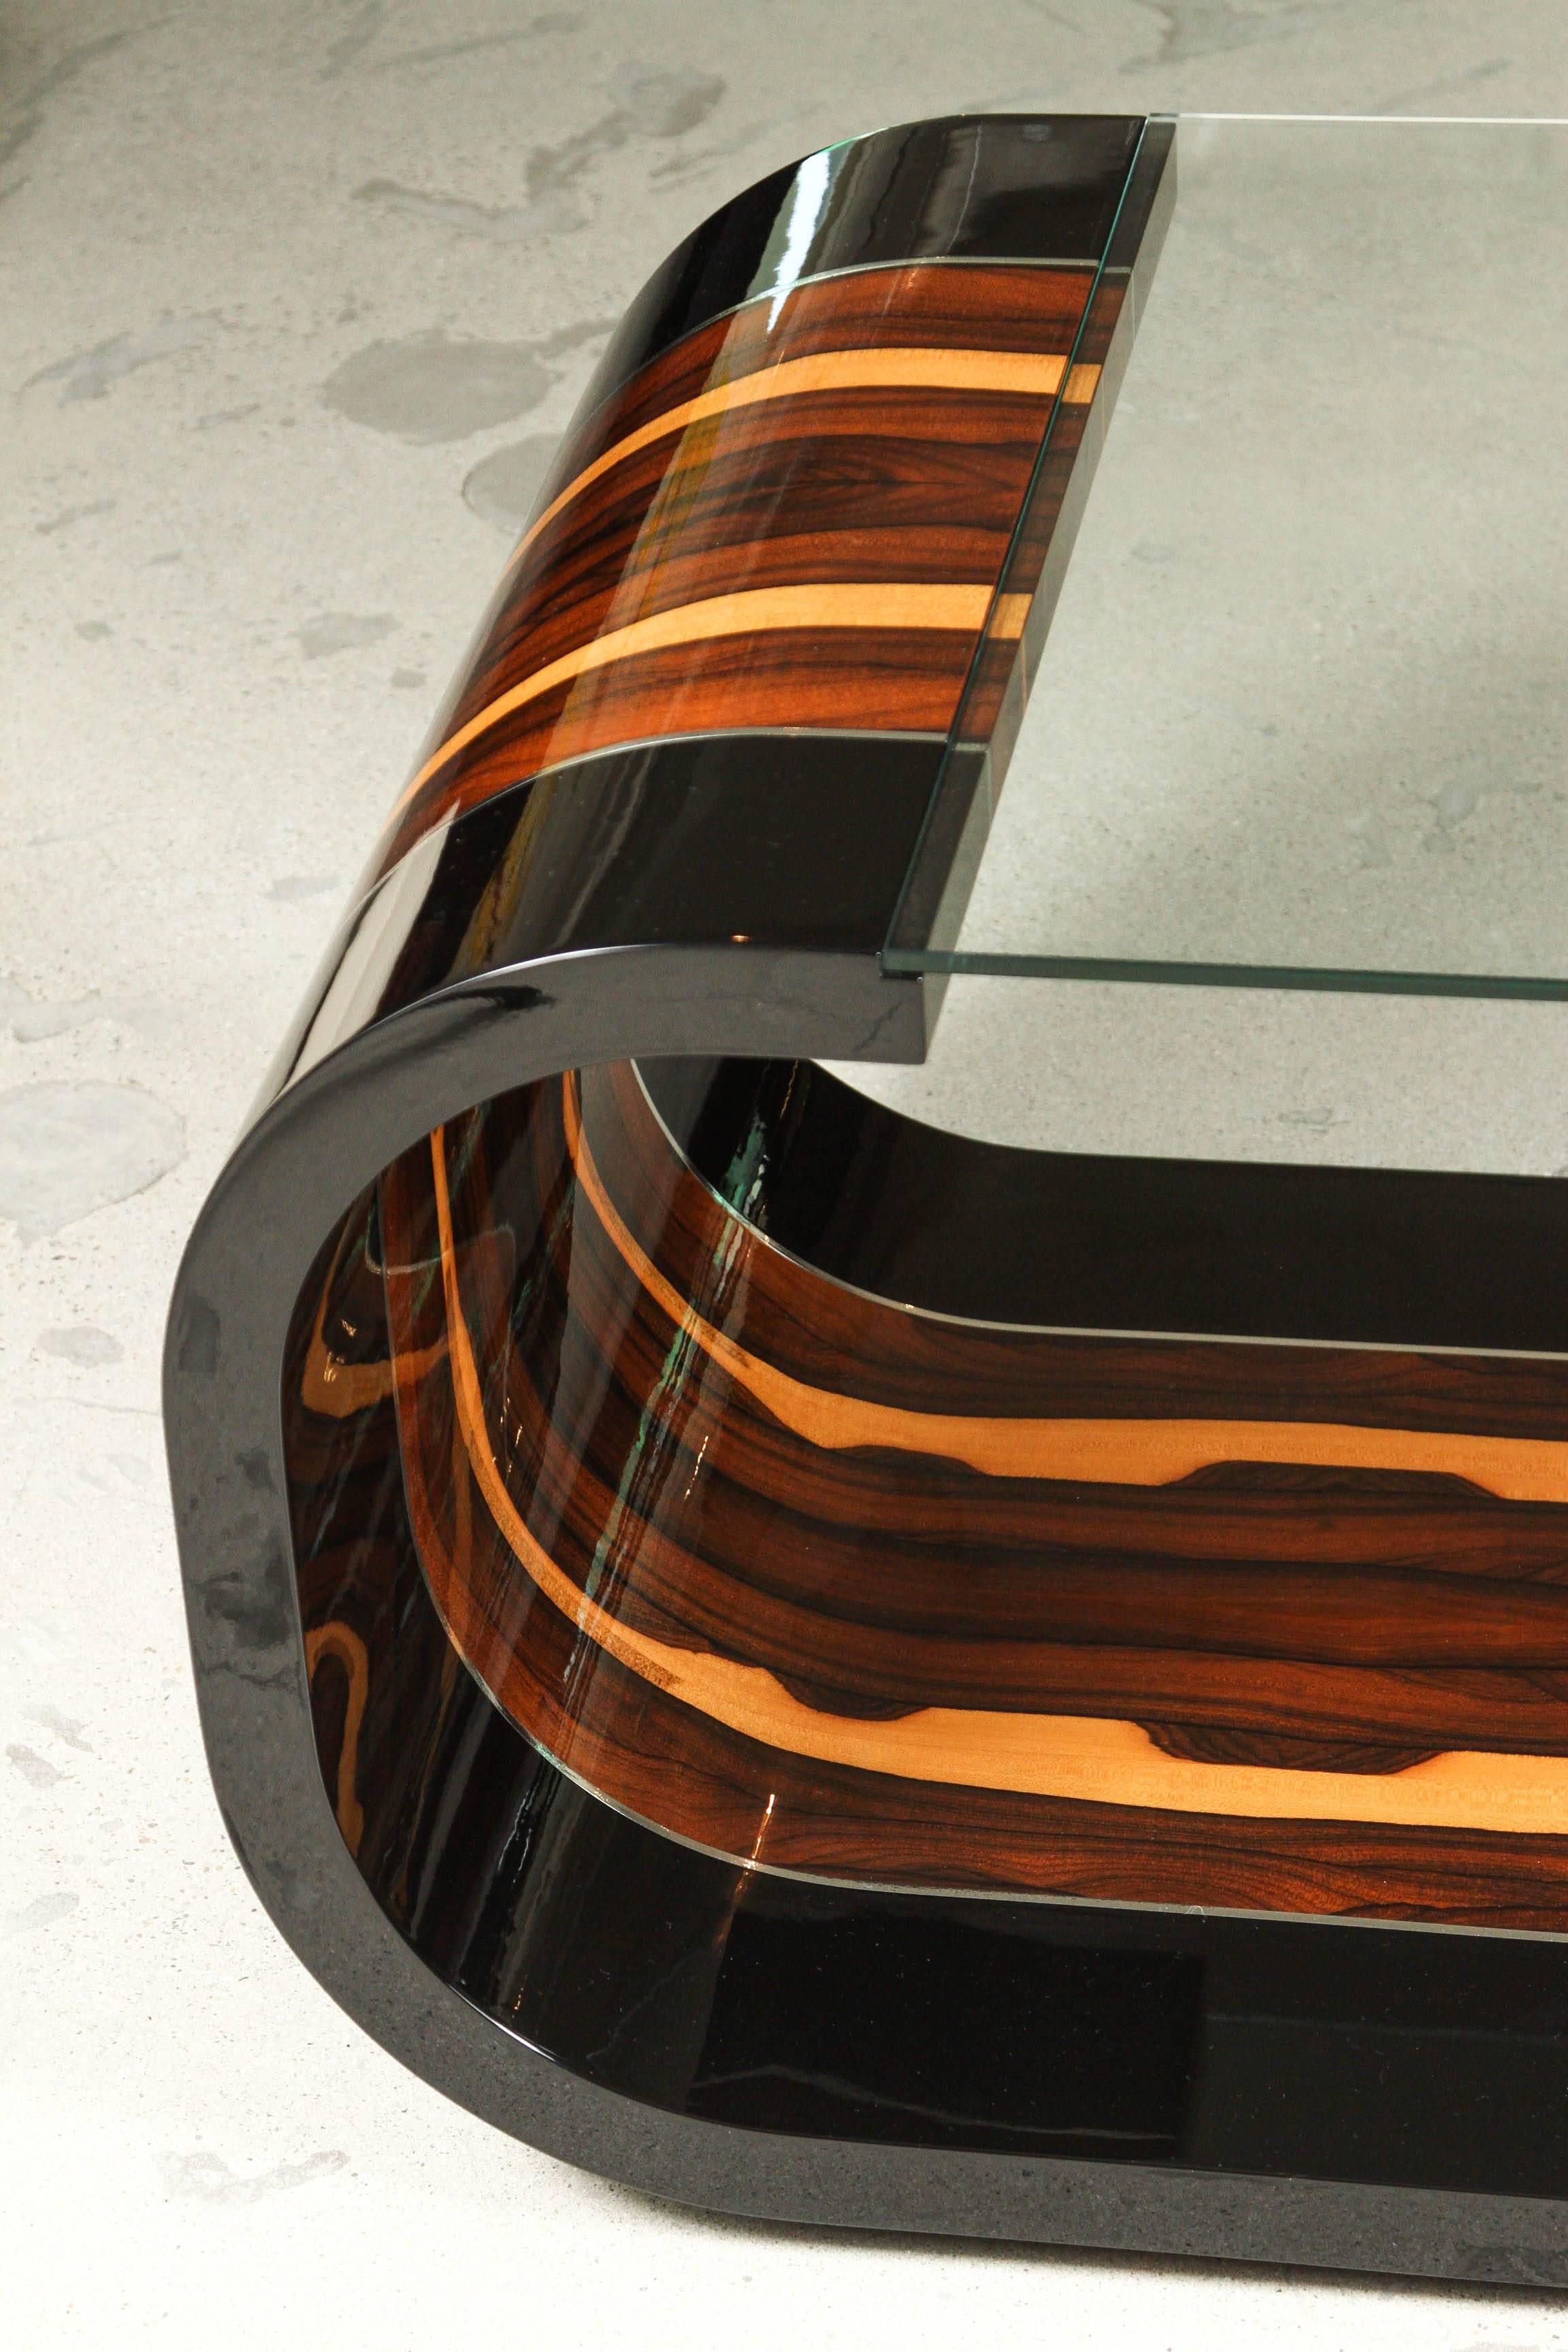 German fine furniture maker, Cygal Art Deco, introduces this modern inspired coffee table from their new 